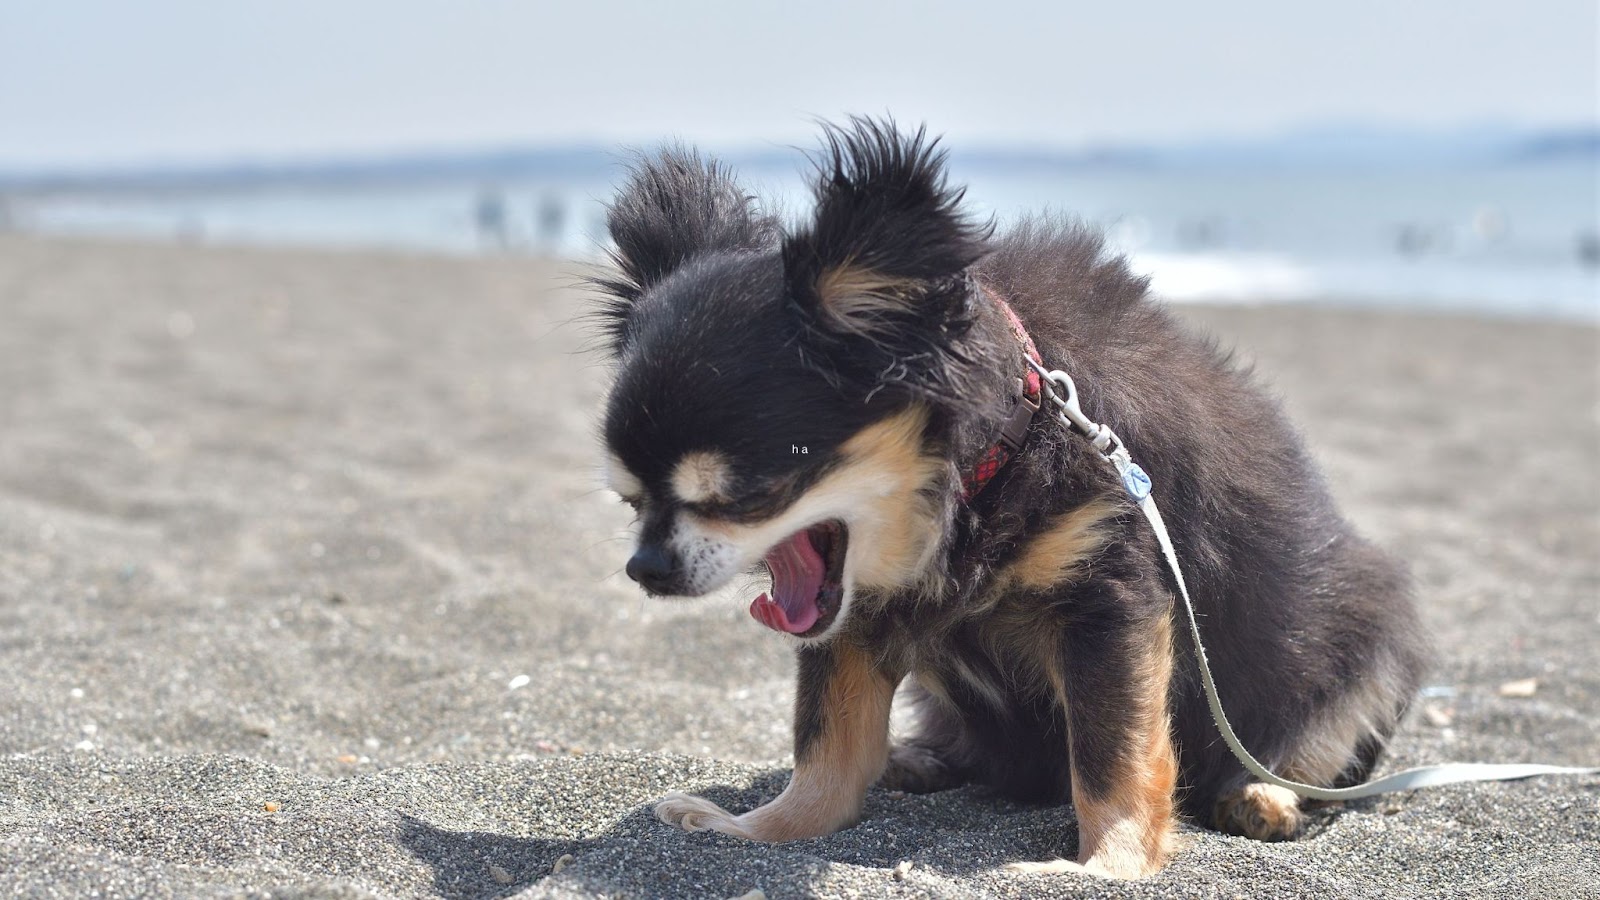 sneezing chihuahua why is this dog sneezing so much